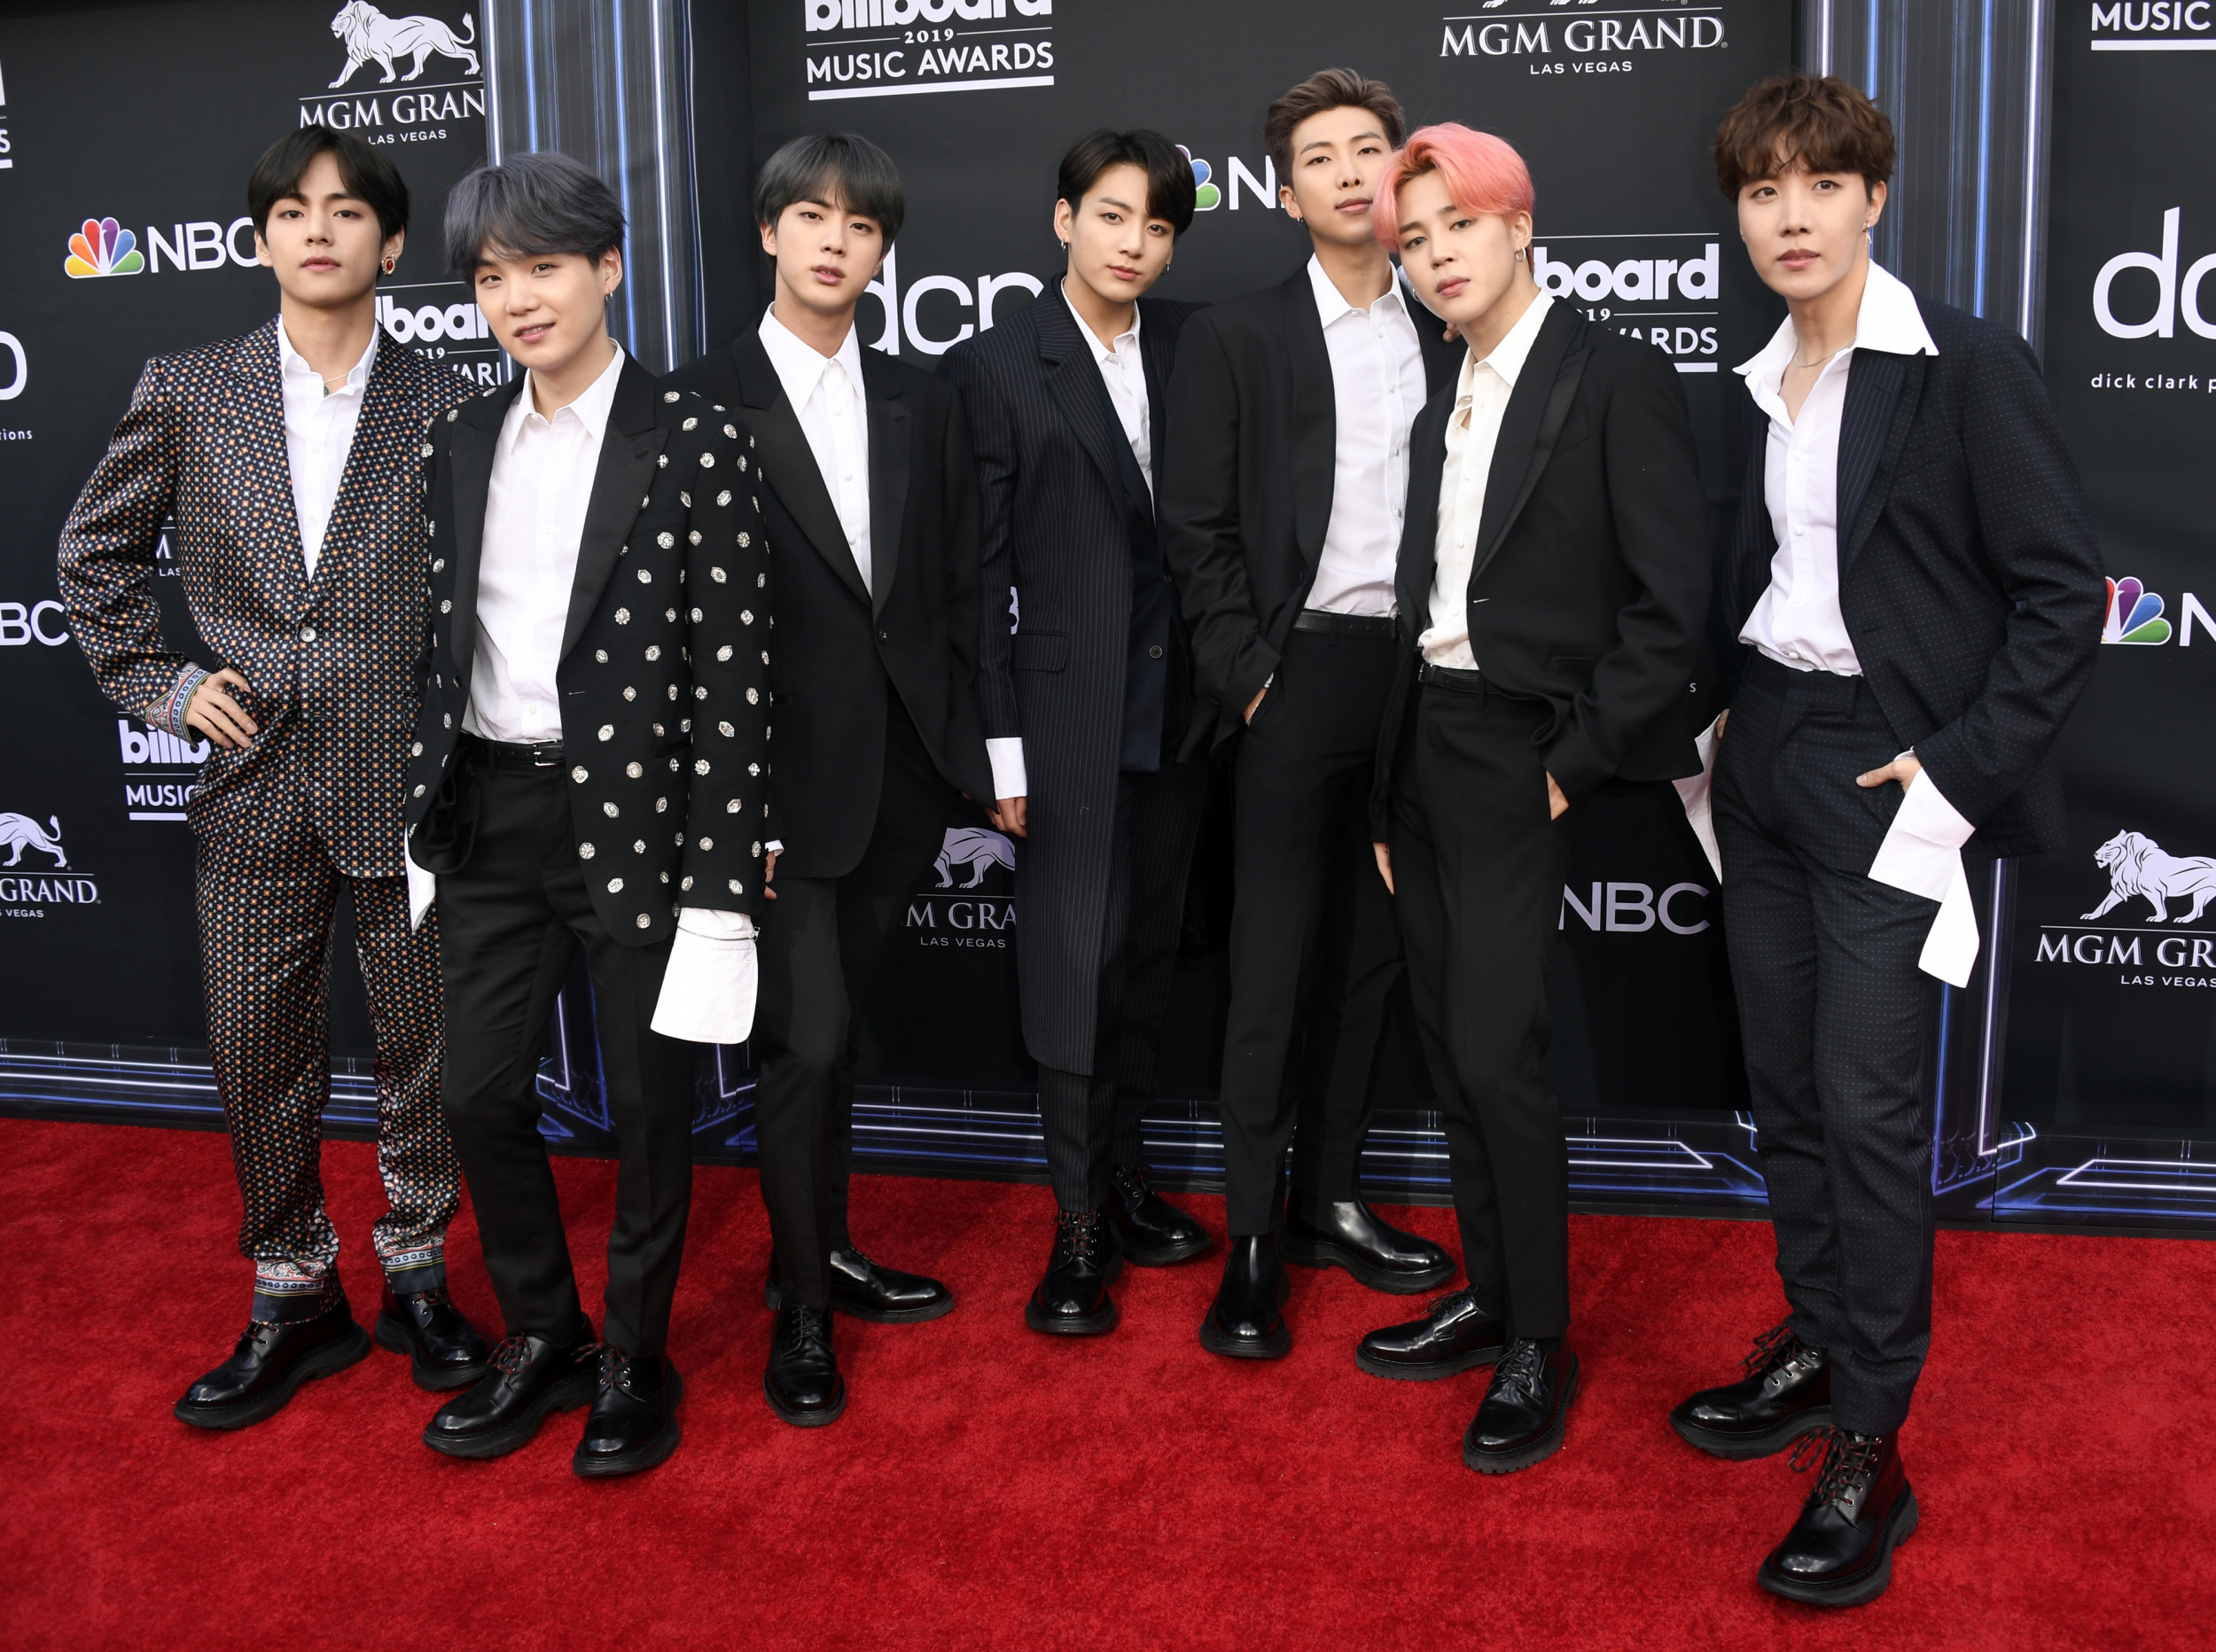 How K-pop group BTS made history at 2019 Grammy Awards